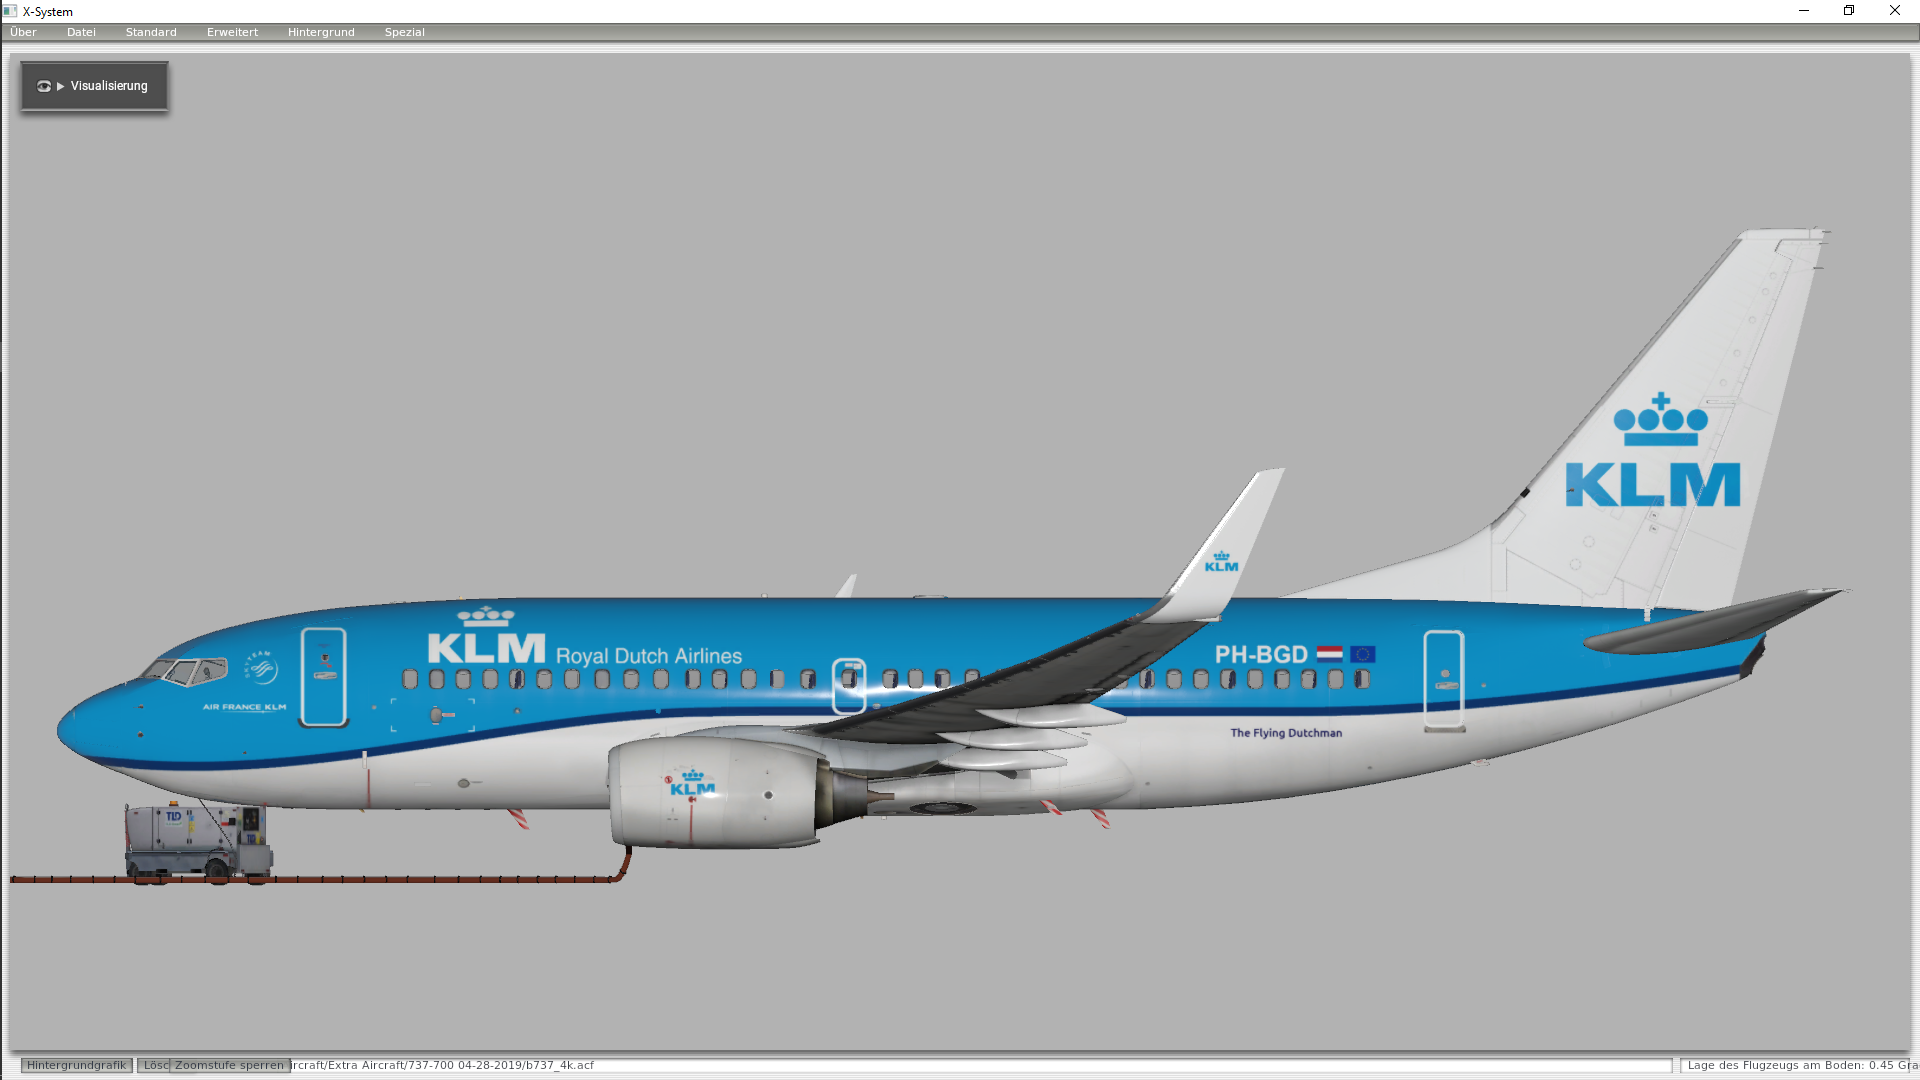 More information about "KLM New Design"